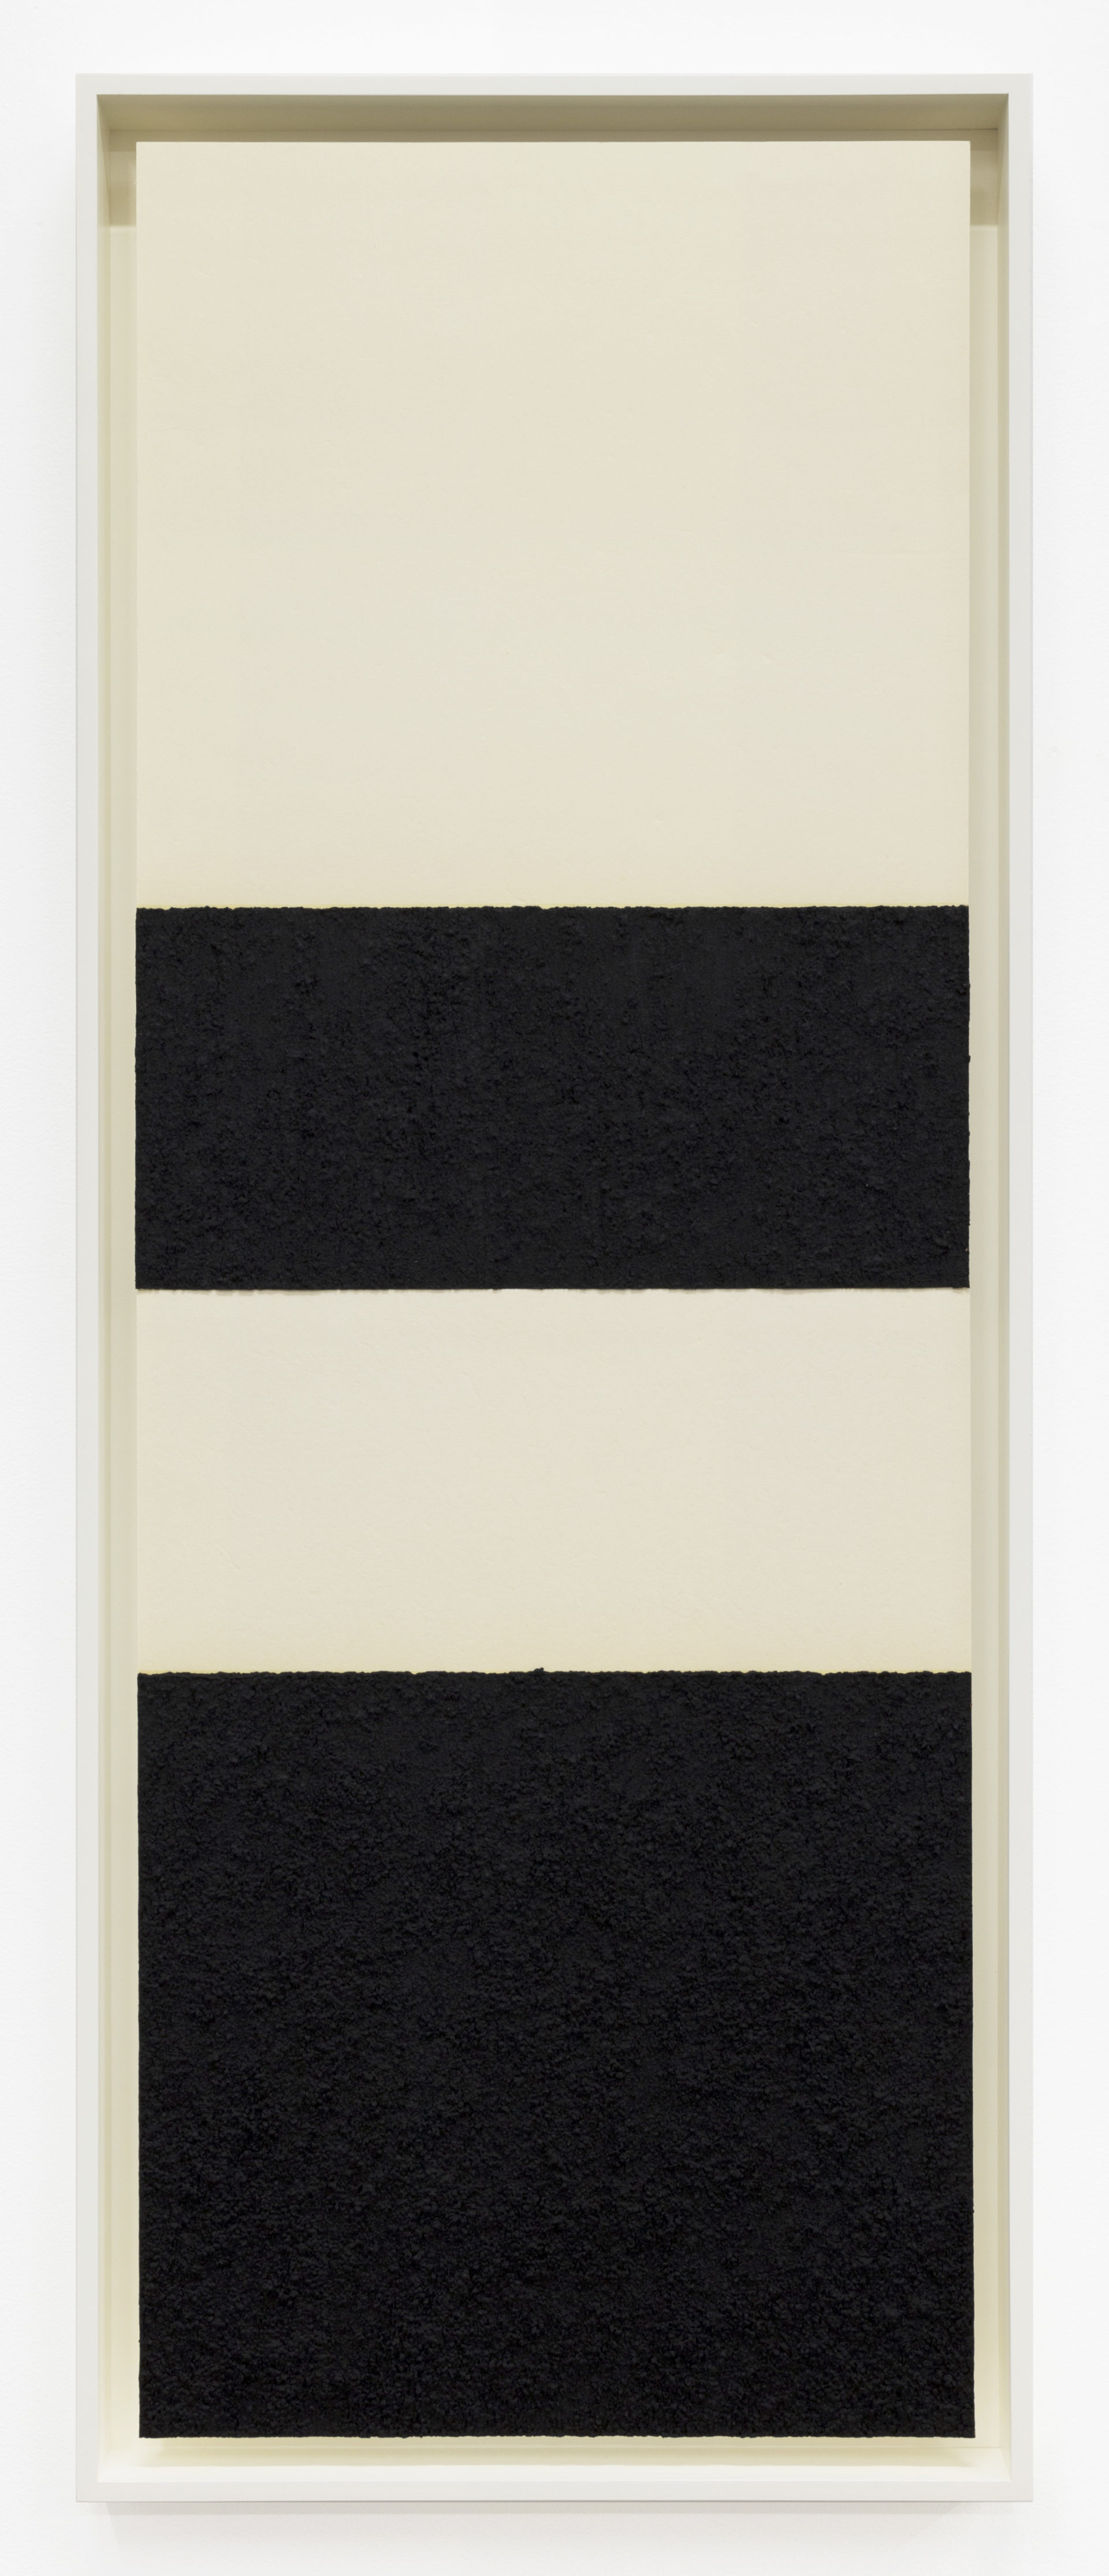 Richard Serra Reversal II, 2015 Hand-applied Paintstik and silica on two sheets of handmade paper 42 x 15 inches (106.7 x 38.1 cm) Edition 42 of 50